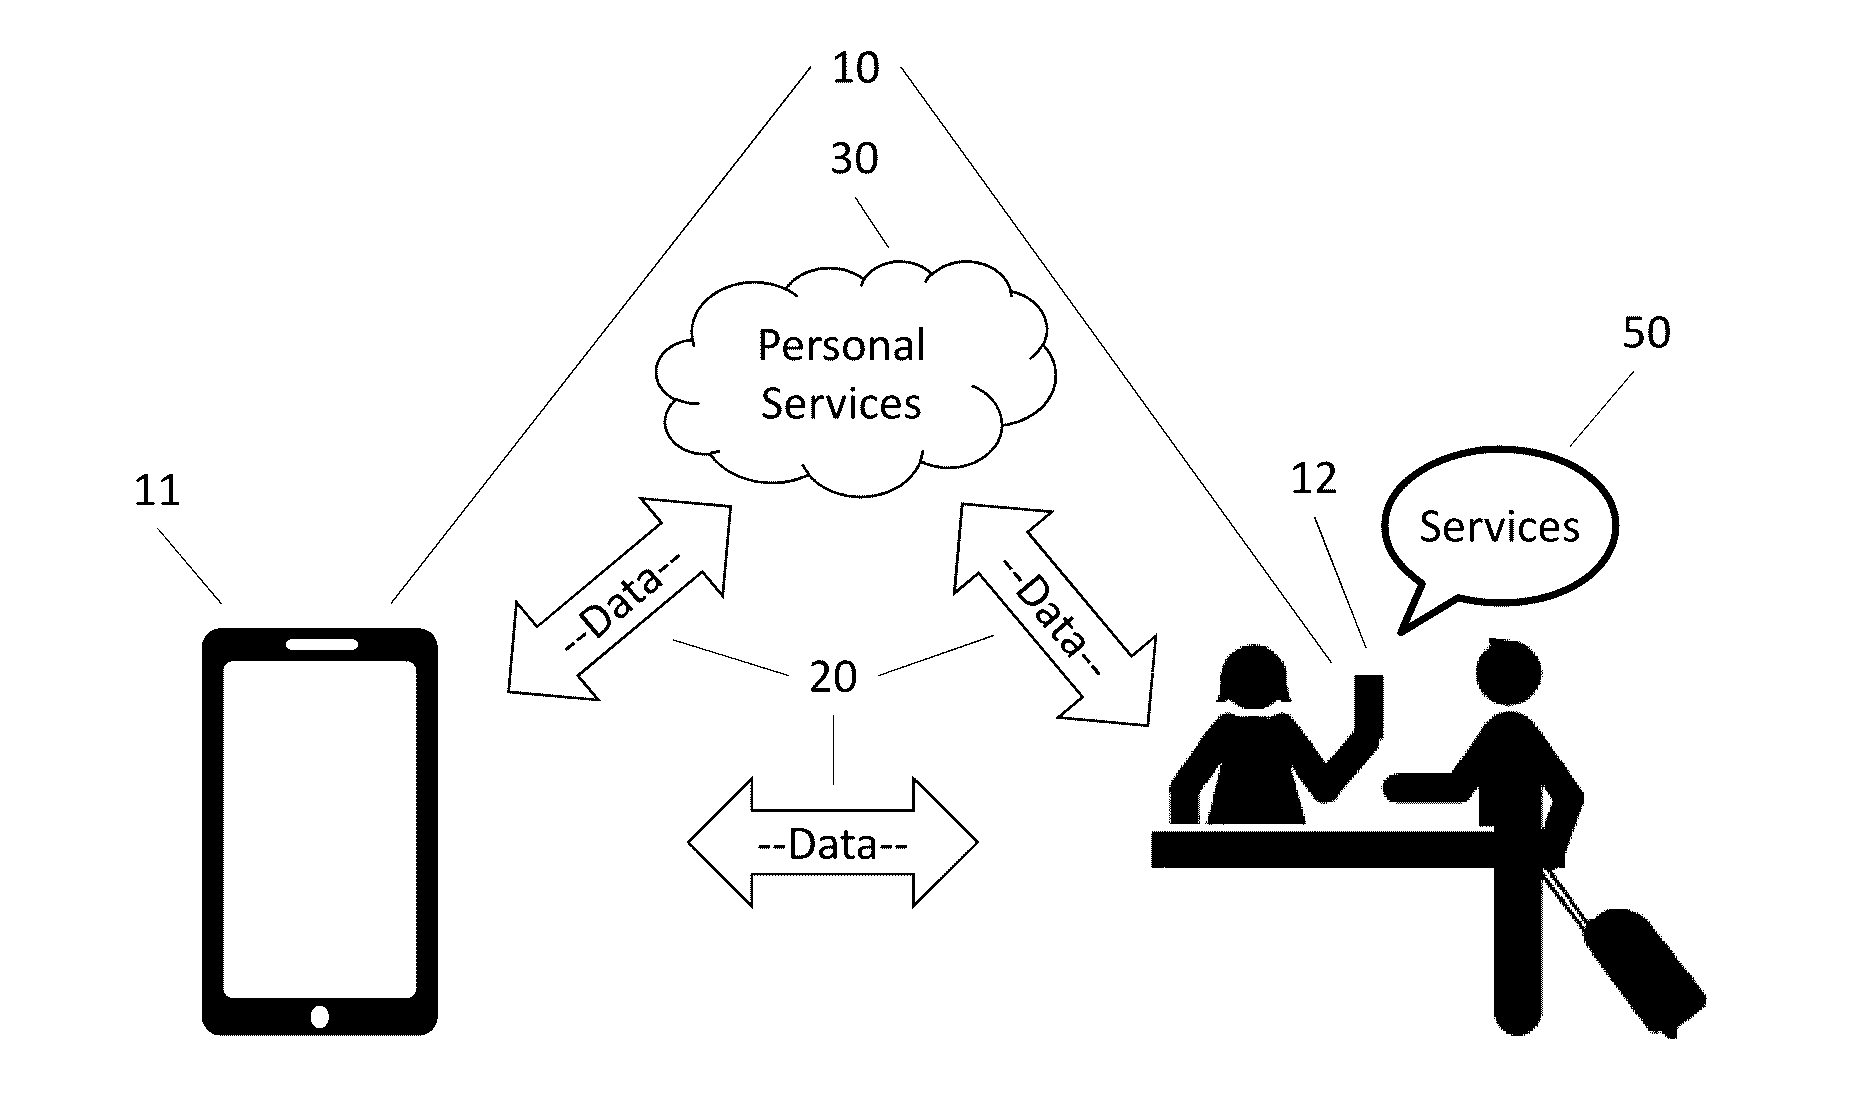 System and Method to Personalize Products and Services